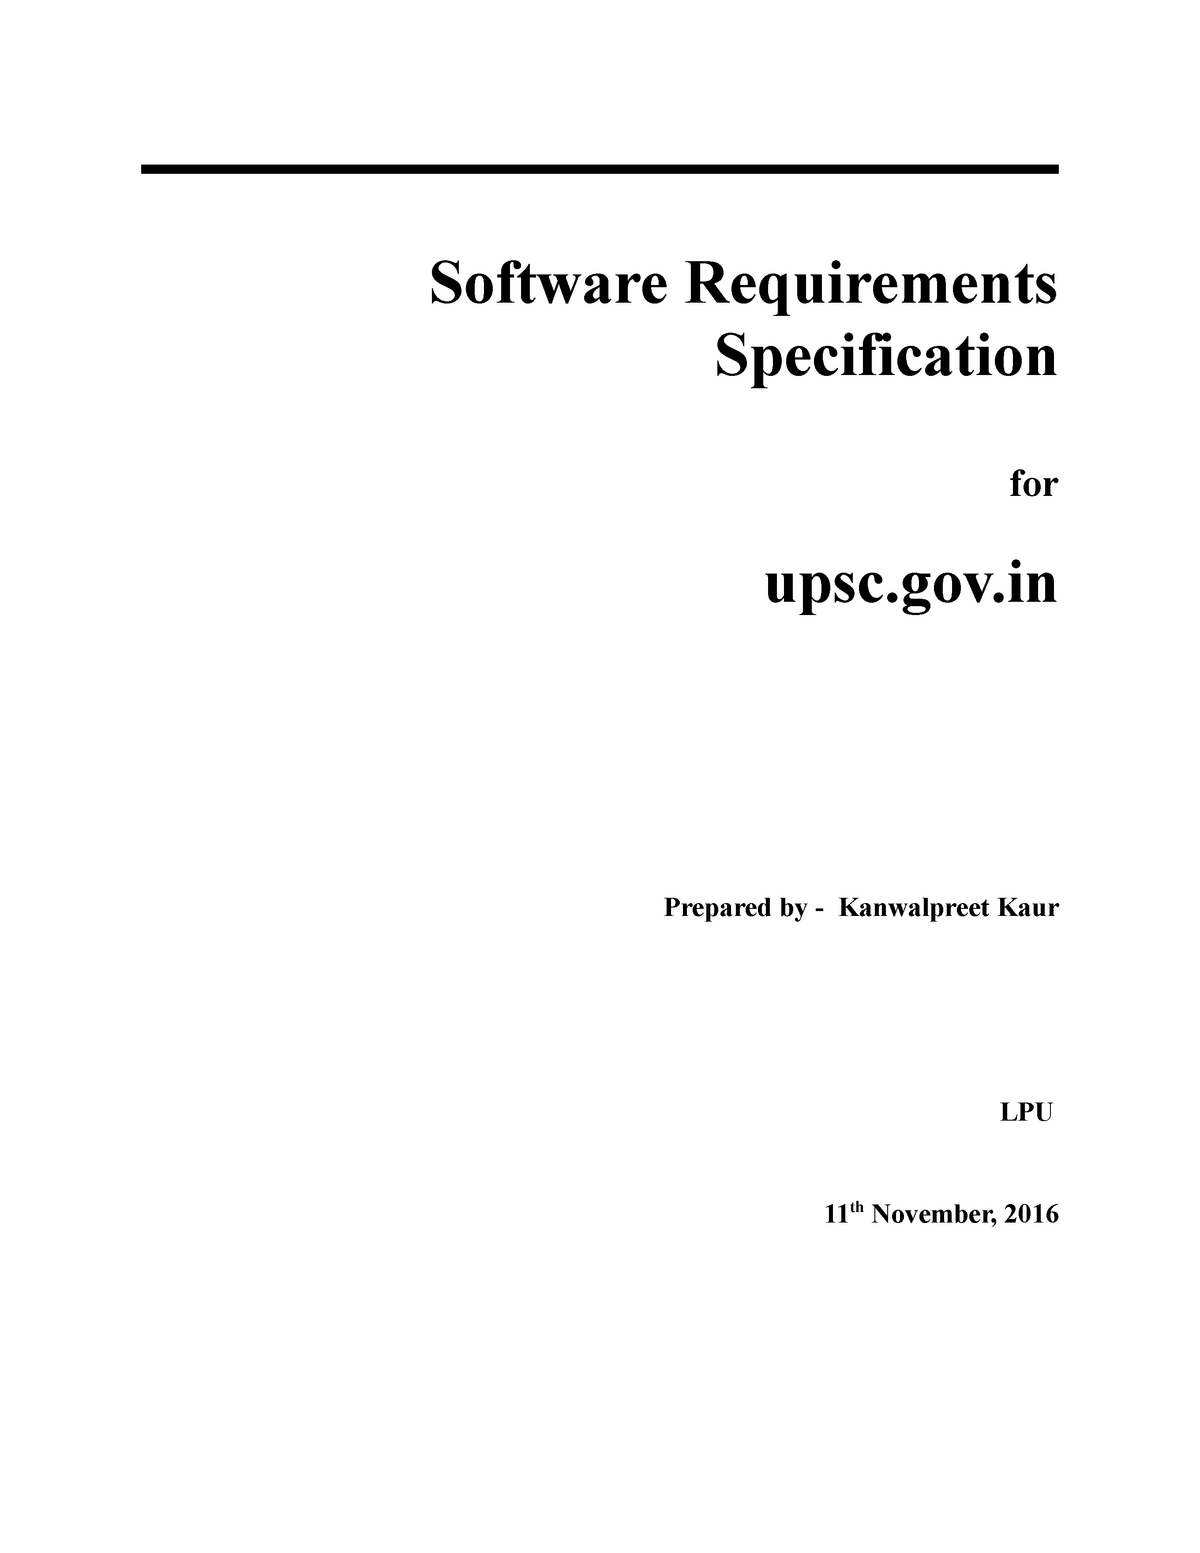 Olx Software Requirement Specification Srs, PDF, Websites